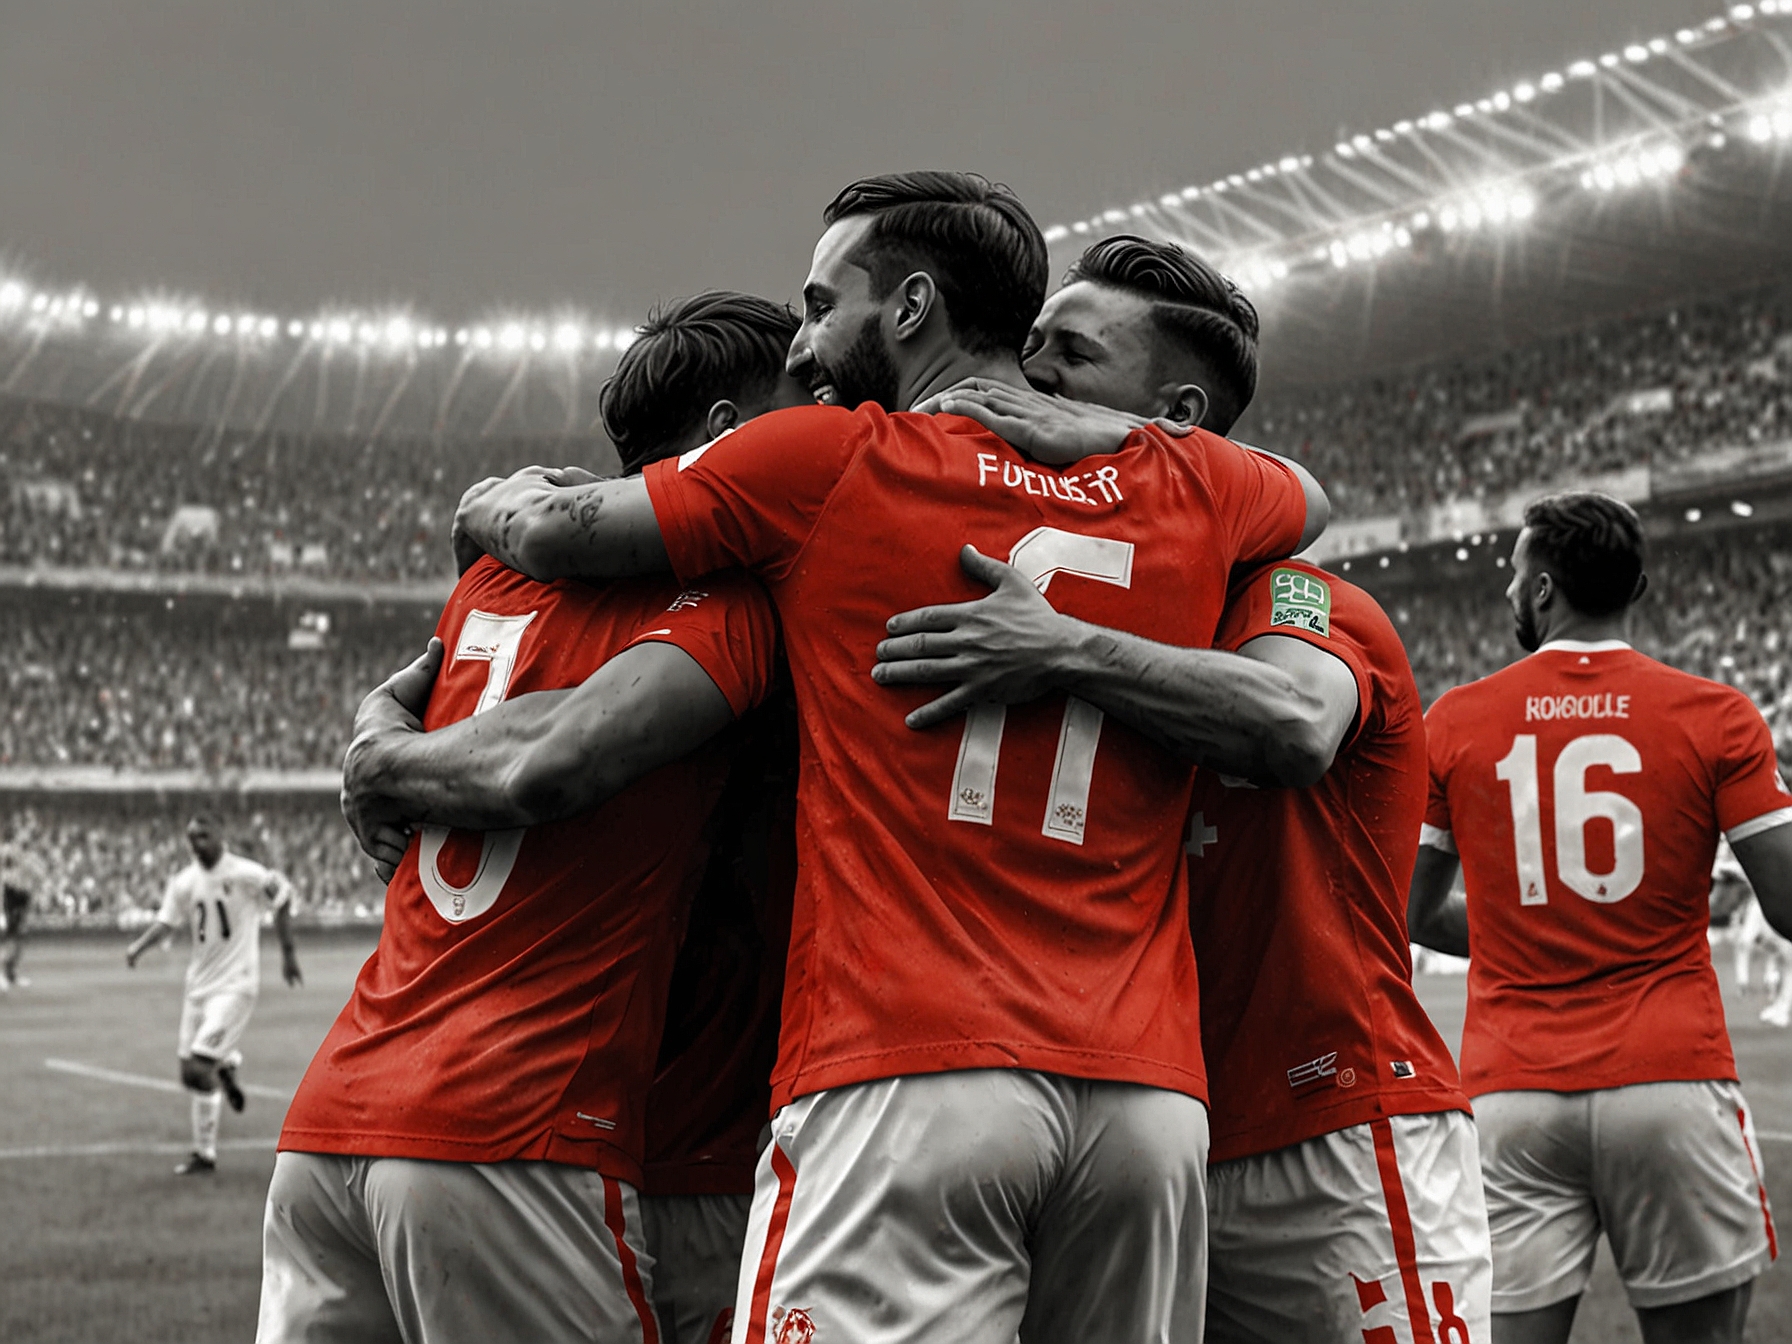 Switzerland's national football team celebrates advancing to the knockout stages of Euro 2024, with players hugging and cheering on the field after a decisive match.